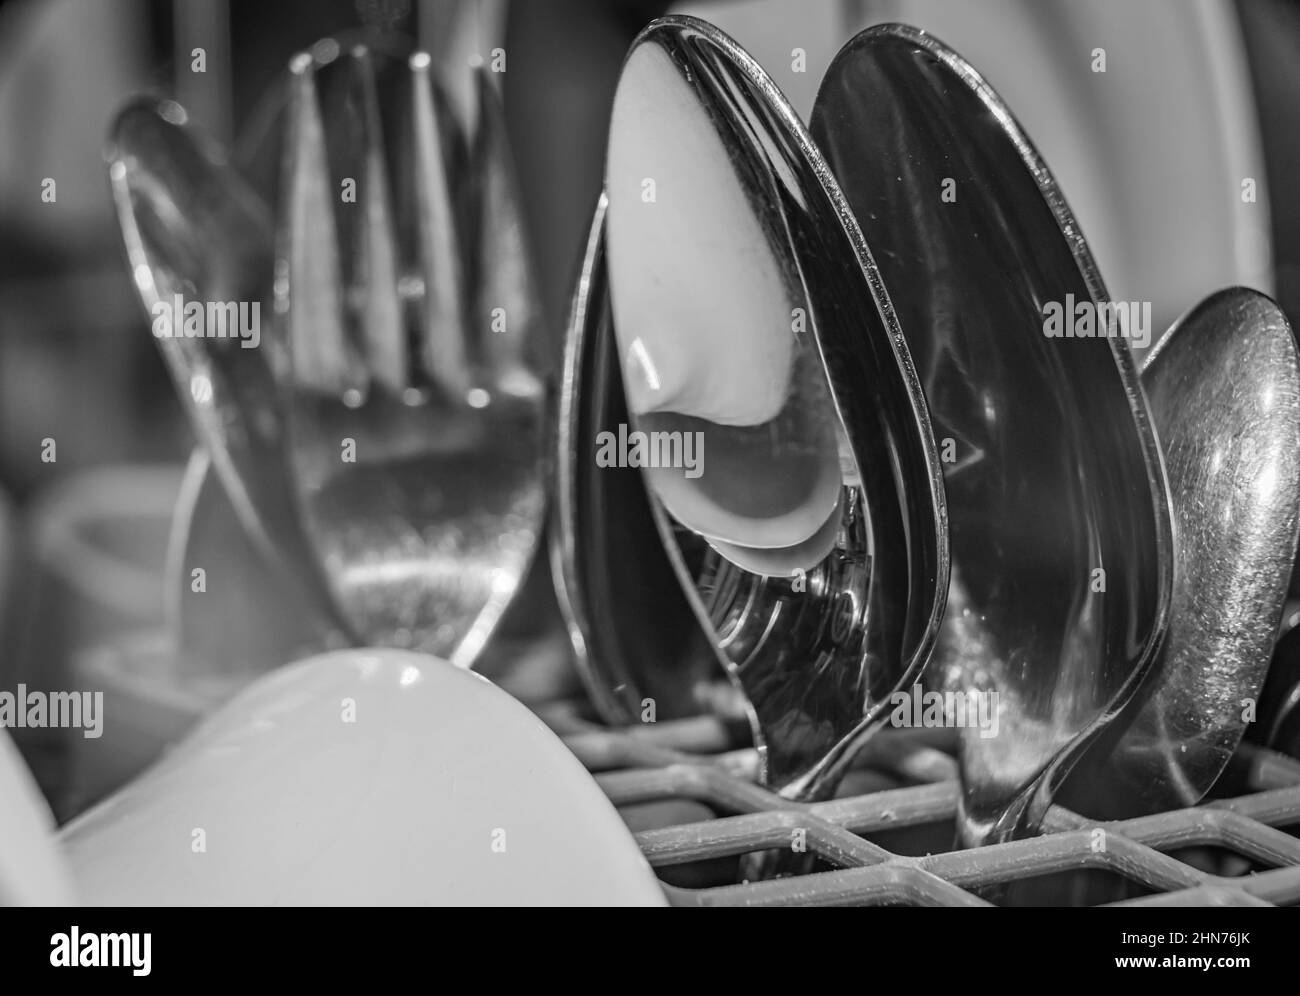 Dishes and cutlery cleaned in a dishwasher Stock Photo